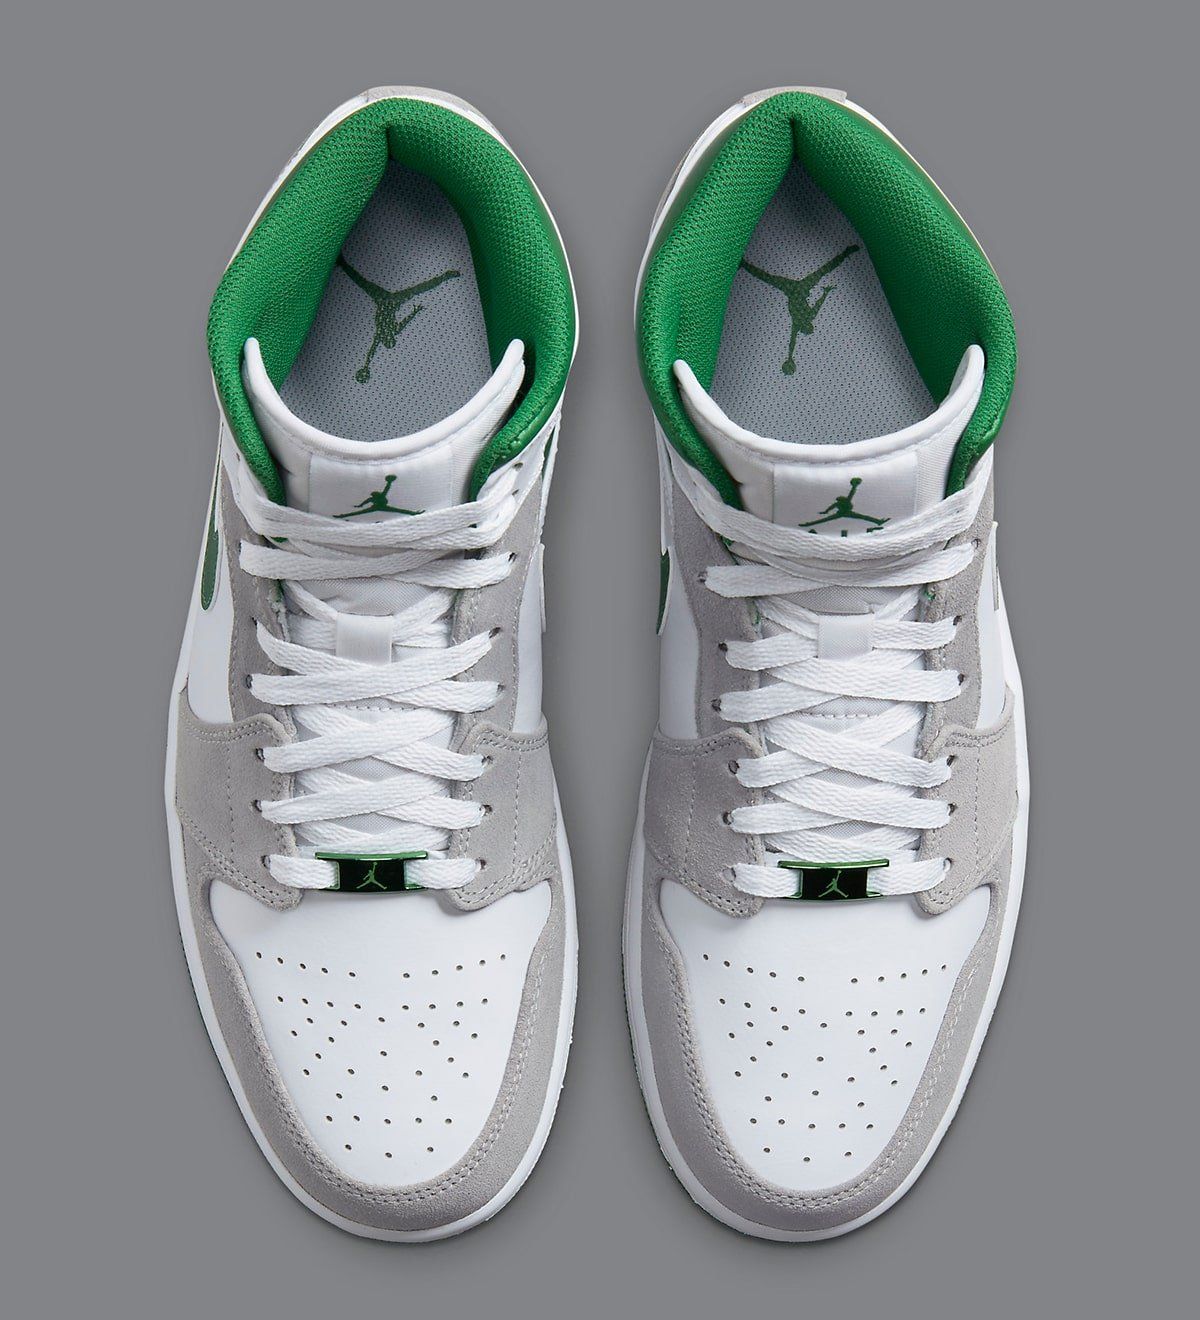 Air Jordan 1 Mid Appears in White, Grey and Pine Green | HOUSE OF HEAT